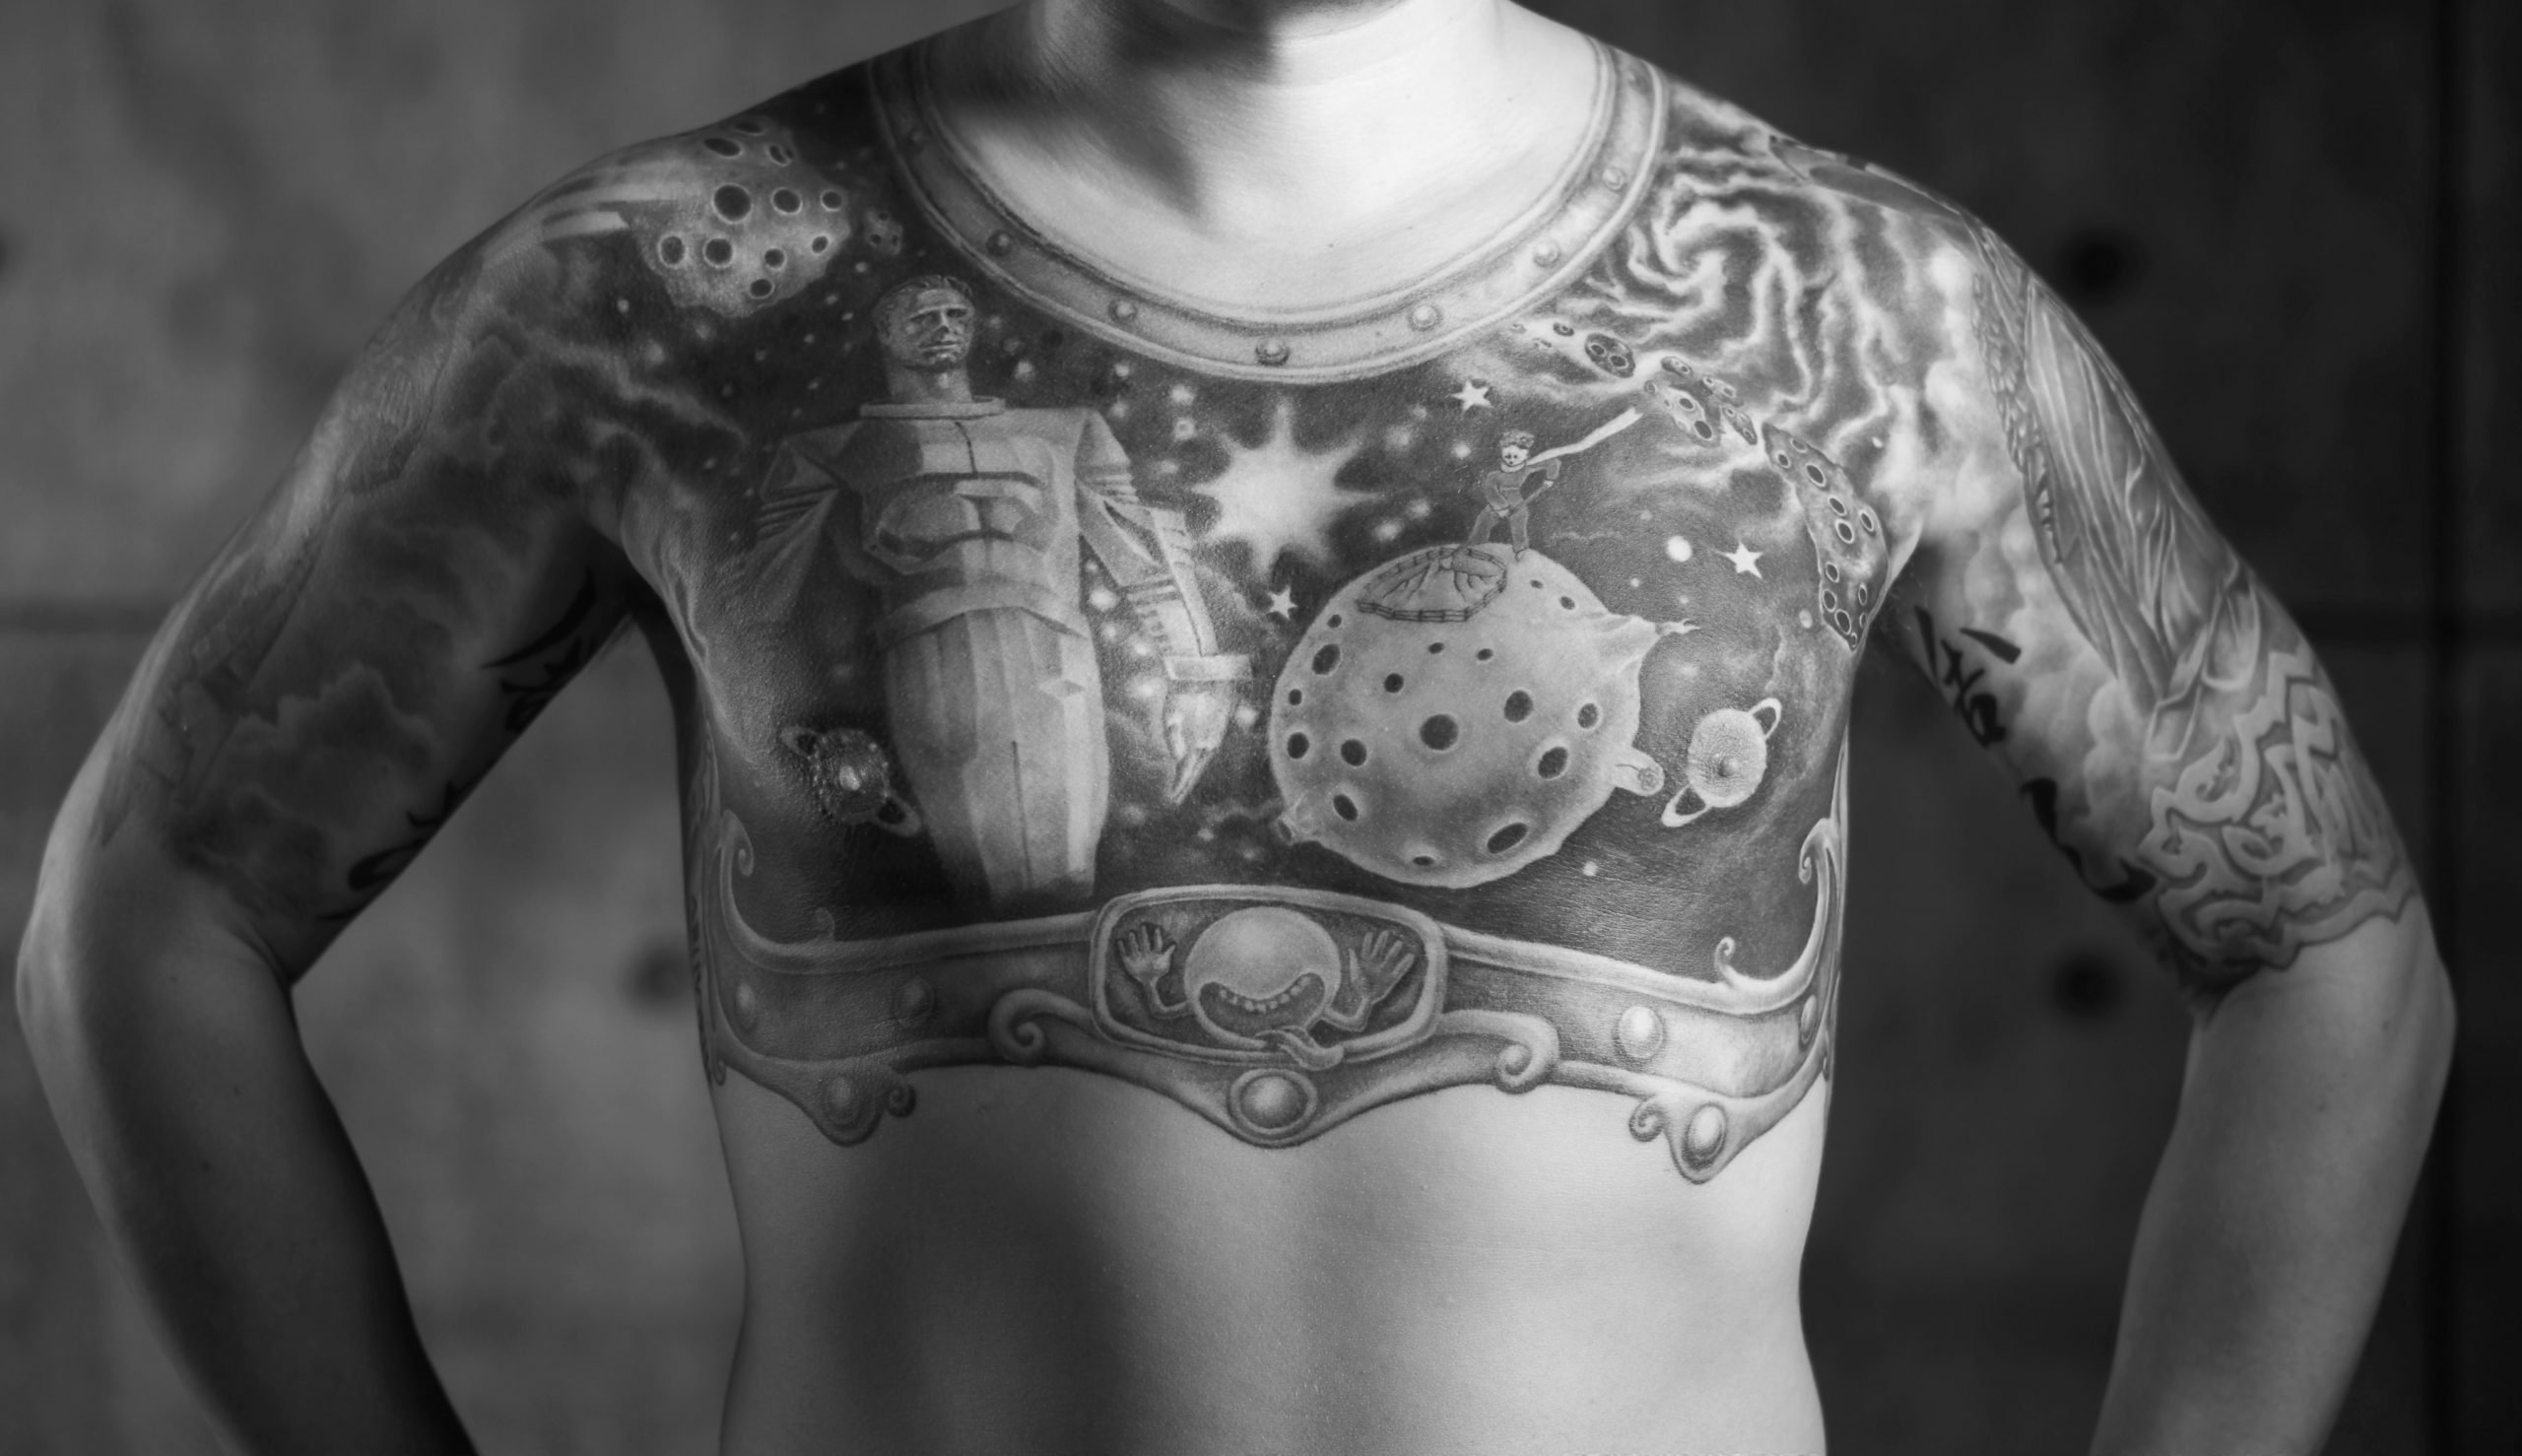 A black and white image of a man's chest featuring a large tattoo. 